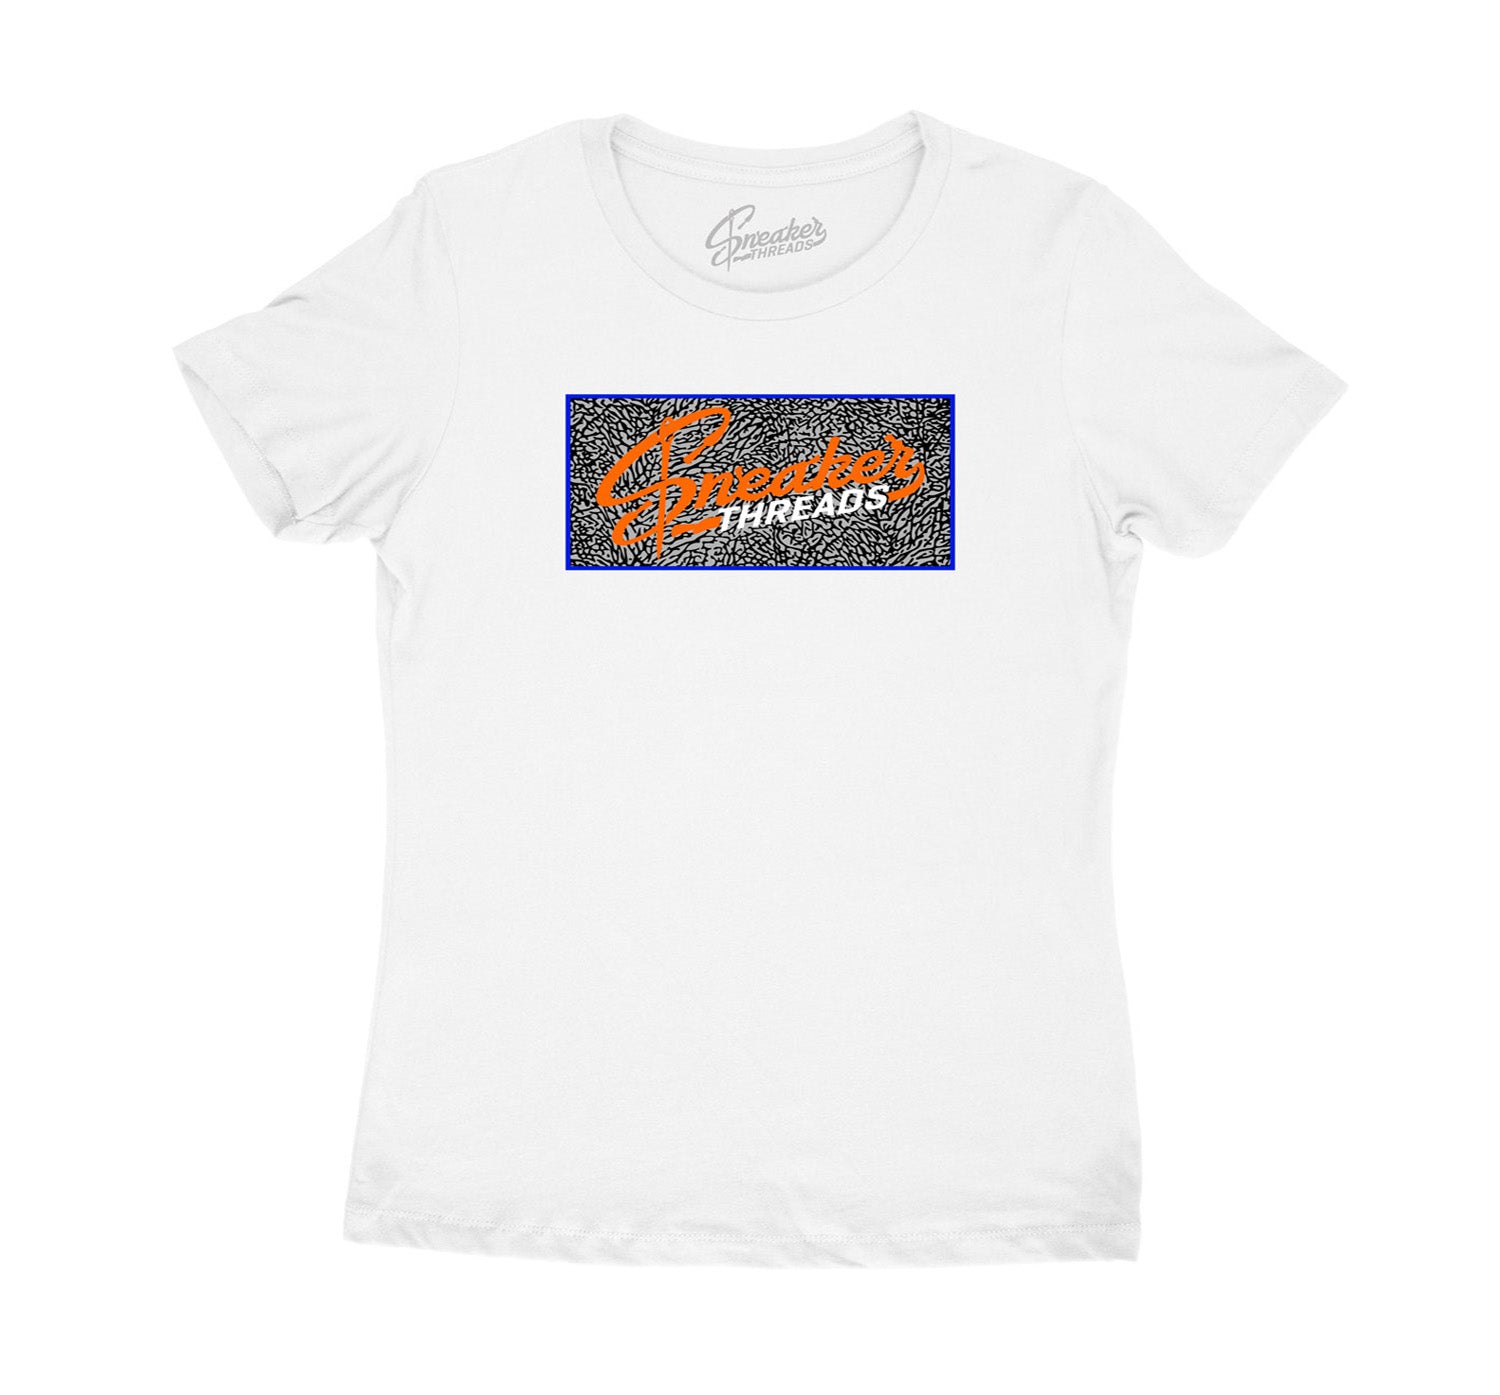 Jordan 3 womens knicks sneaker collection has matching womens shirts created to match perfectly